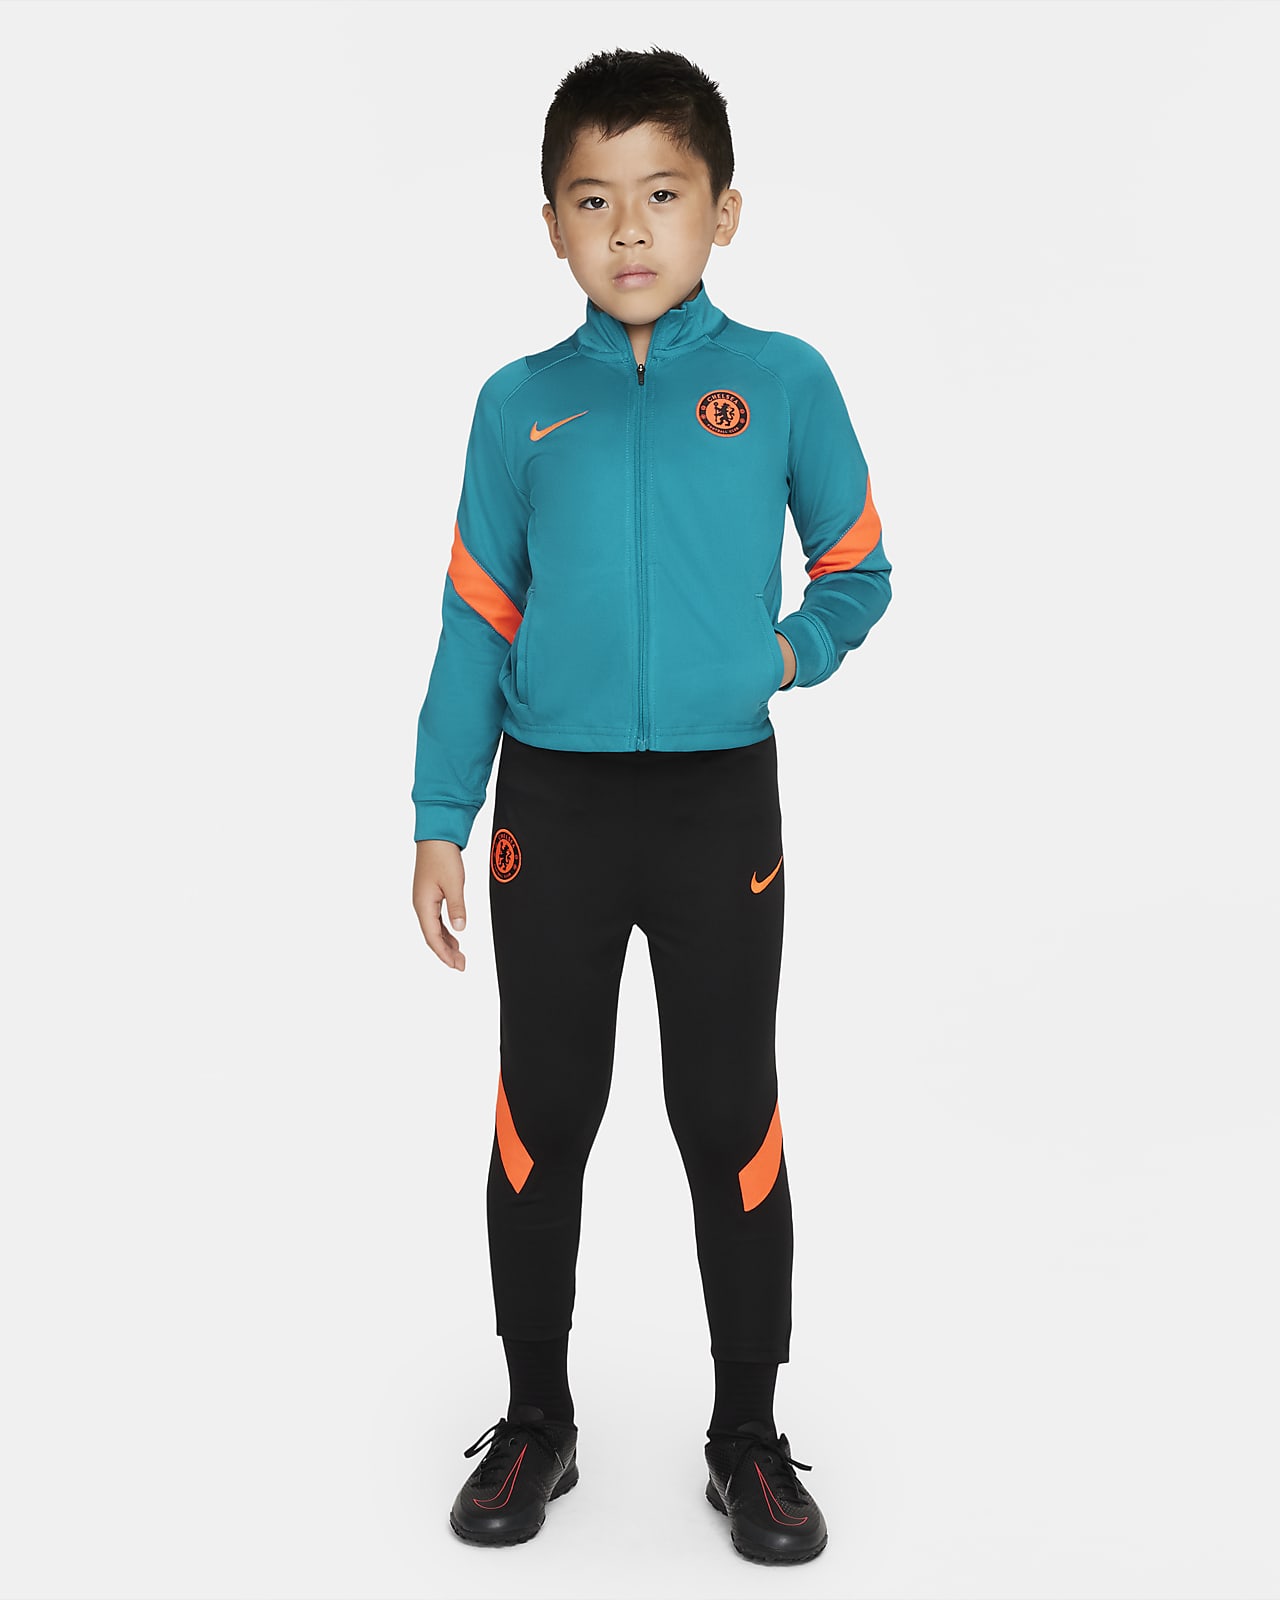 Chelsea F.C. Strike Younger Kids' Nike Dri-FIT Knit Football Tracksuit